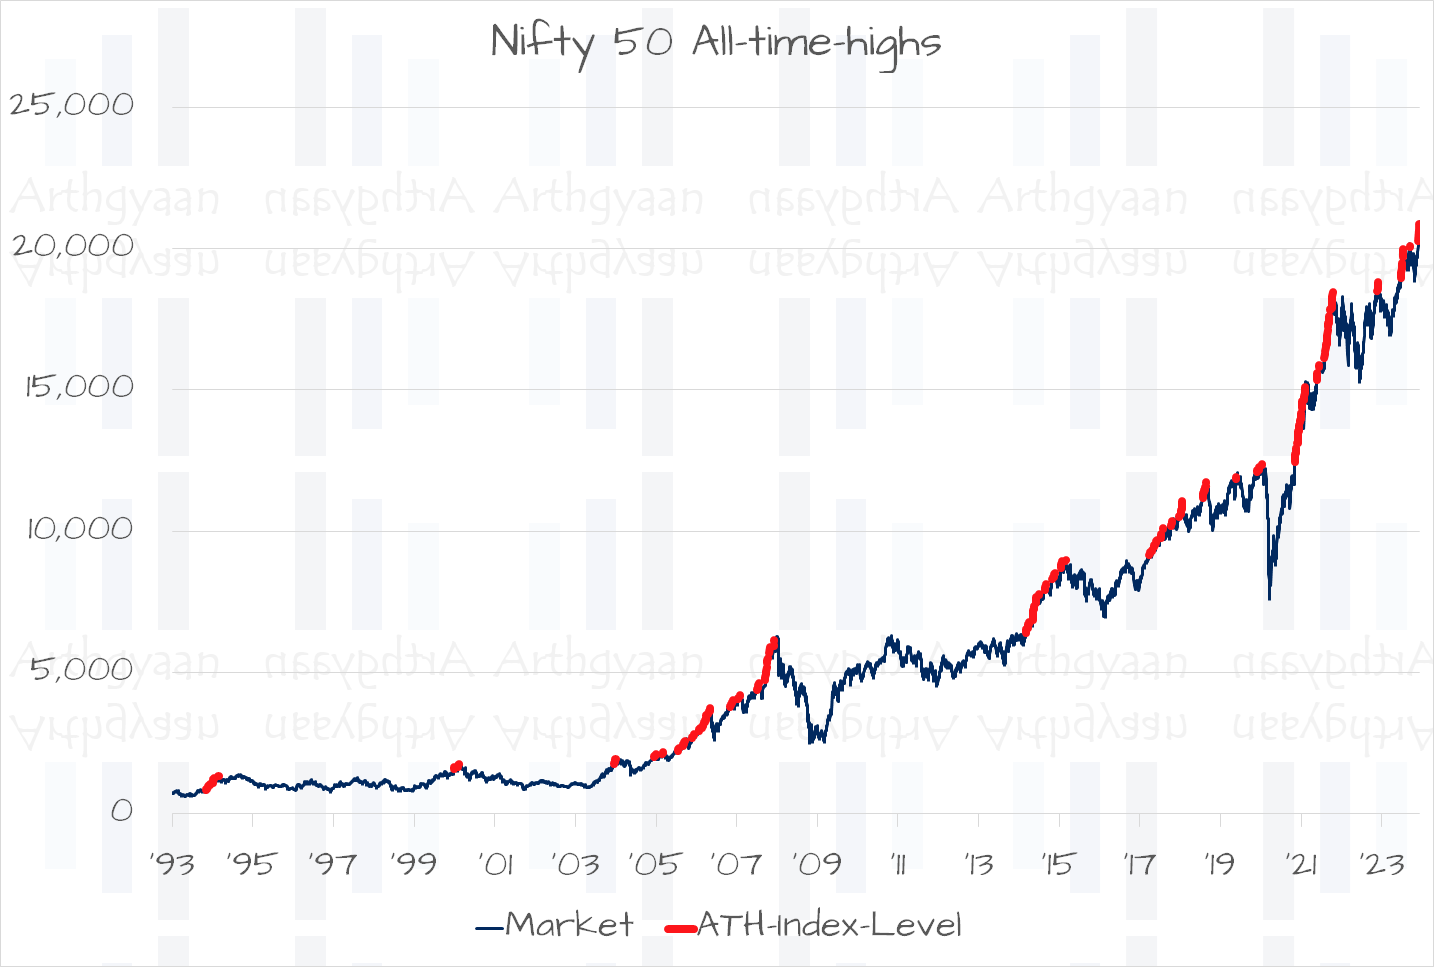 Nifty 50 All-time-highs